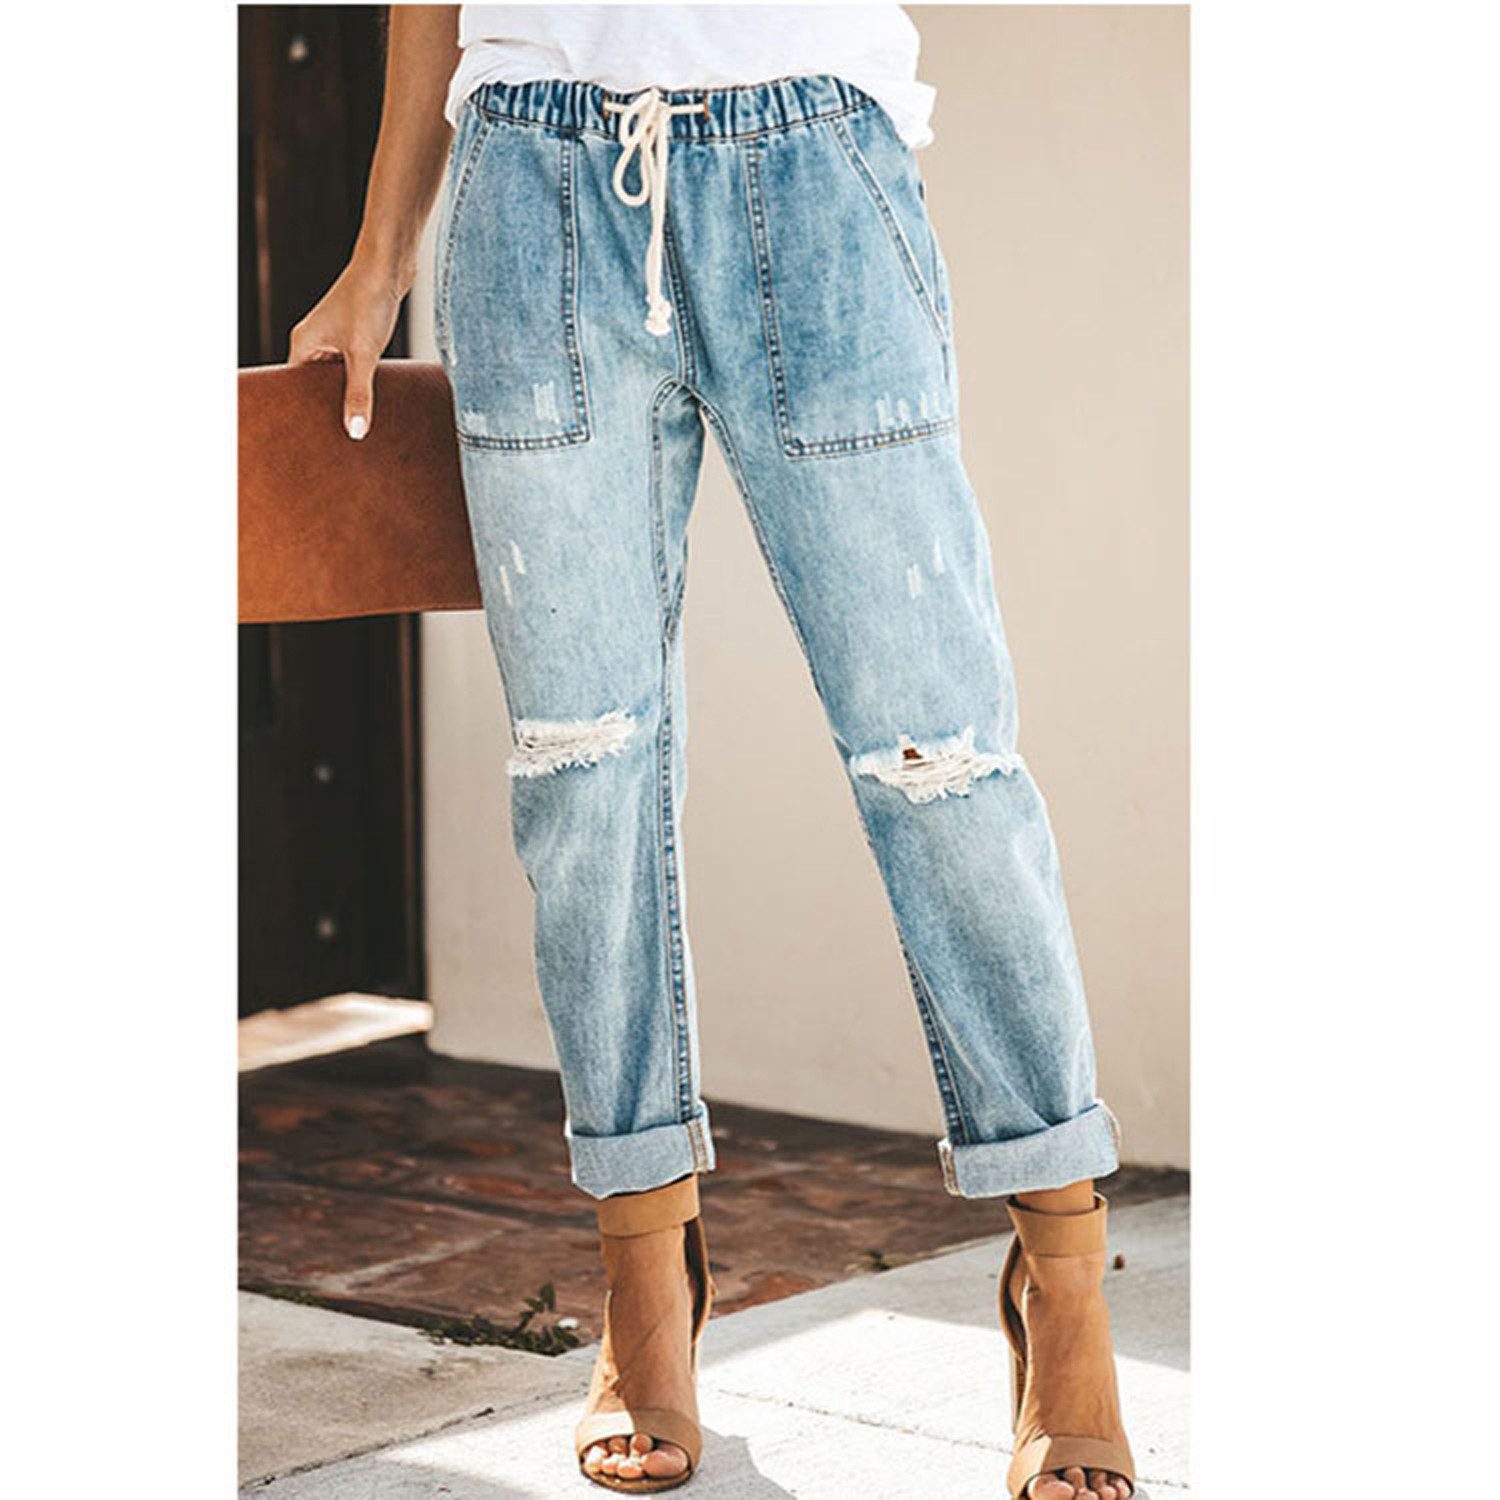 KIKI Destroyed-Jeans Casual High Waist Jeans- Baggy Jeans Women's Knee Ripped Jeans